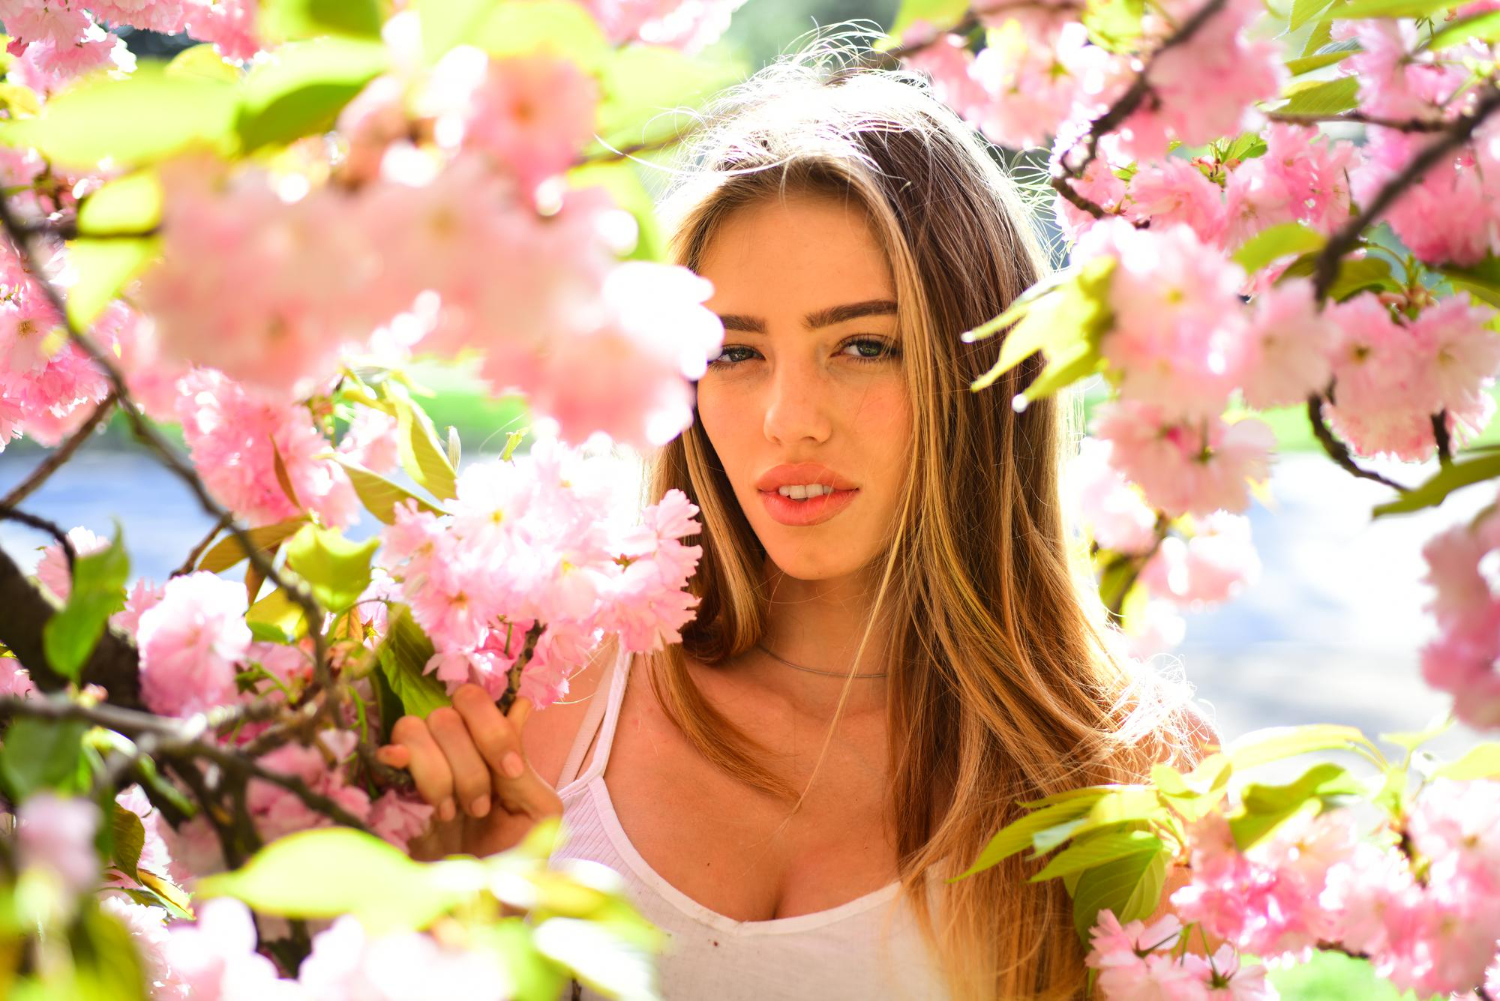 blond girl natural background sensual female enjoying aroma cherry blossom pretty young woman lyssa blooming flowers with pink petals